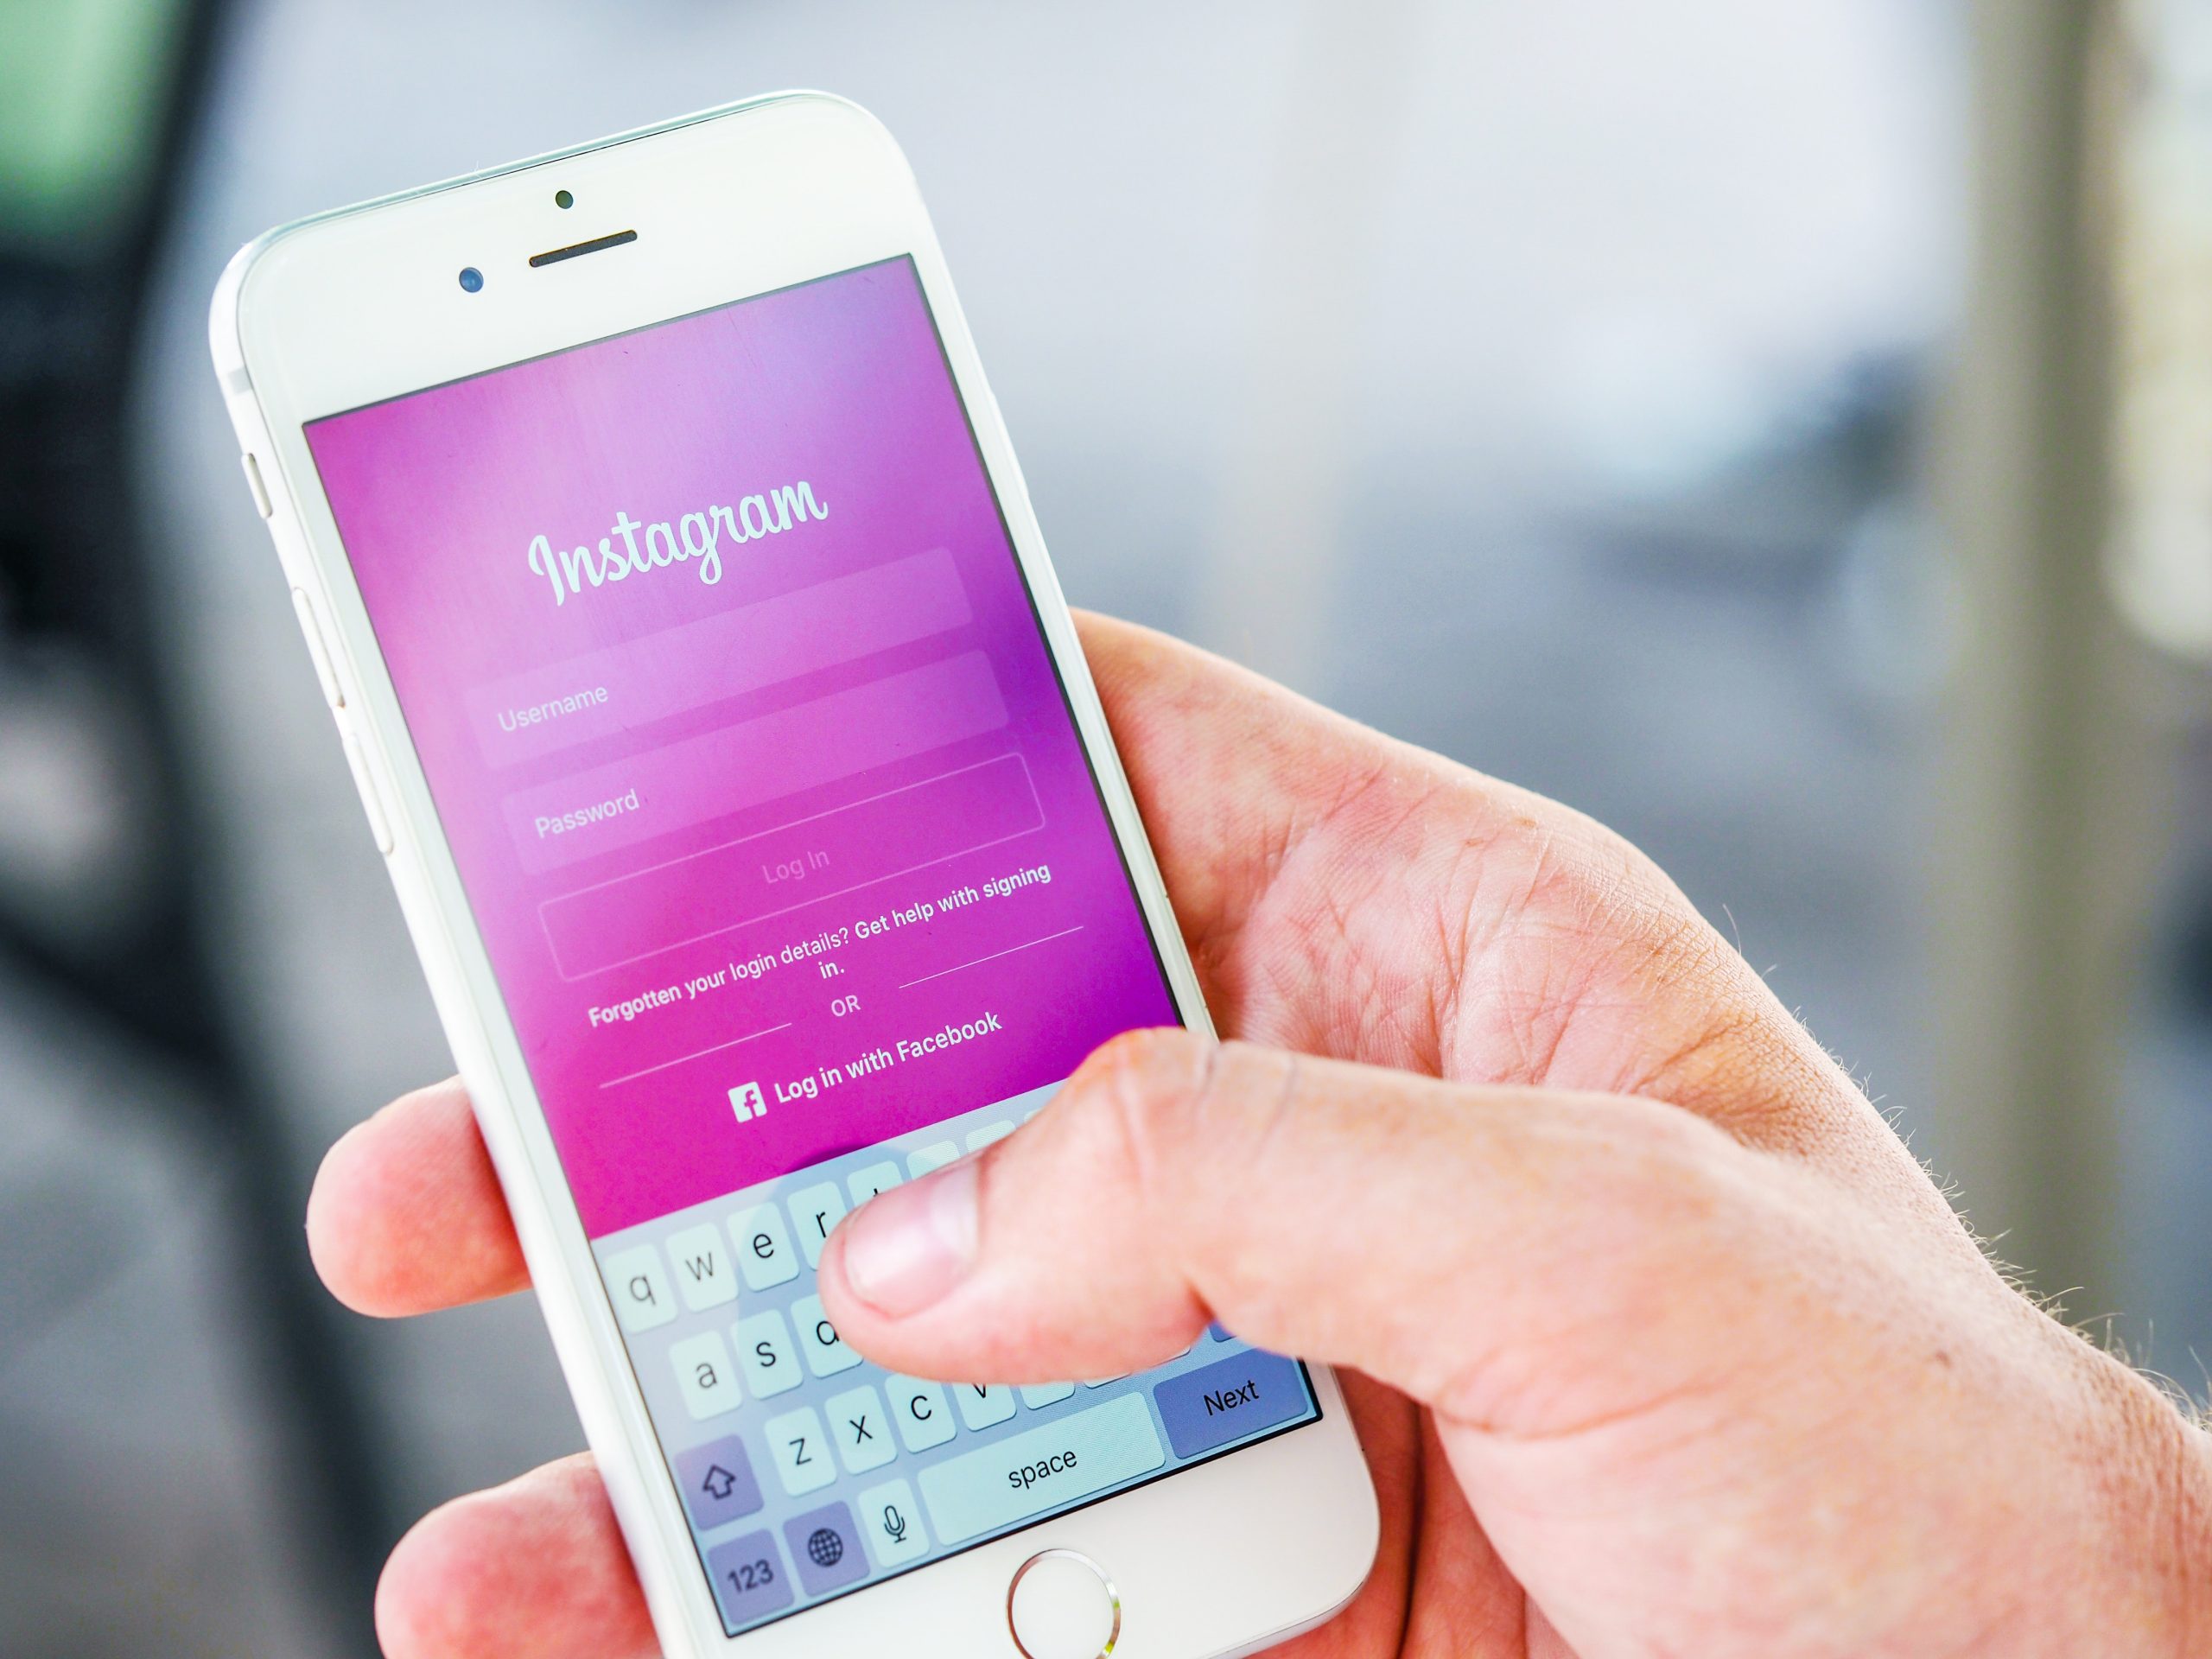 How To Login To Instagram